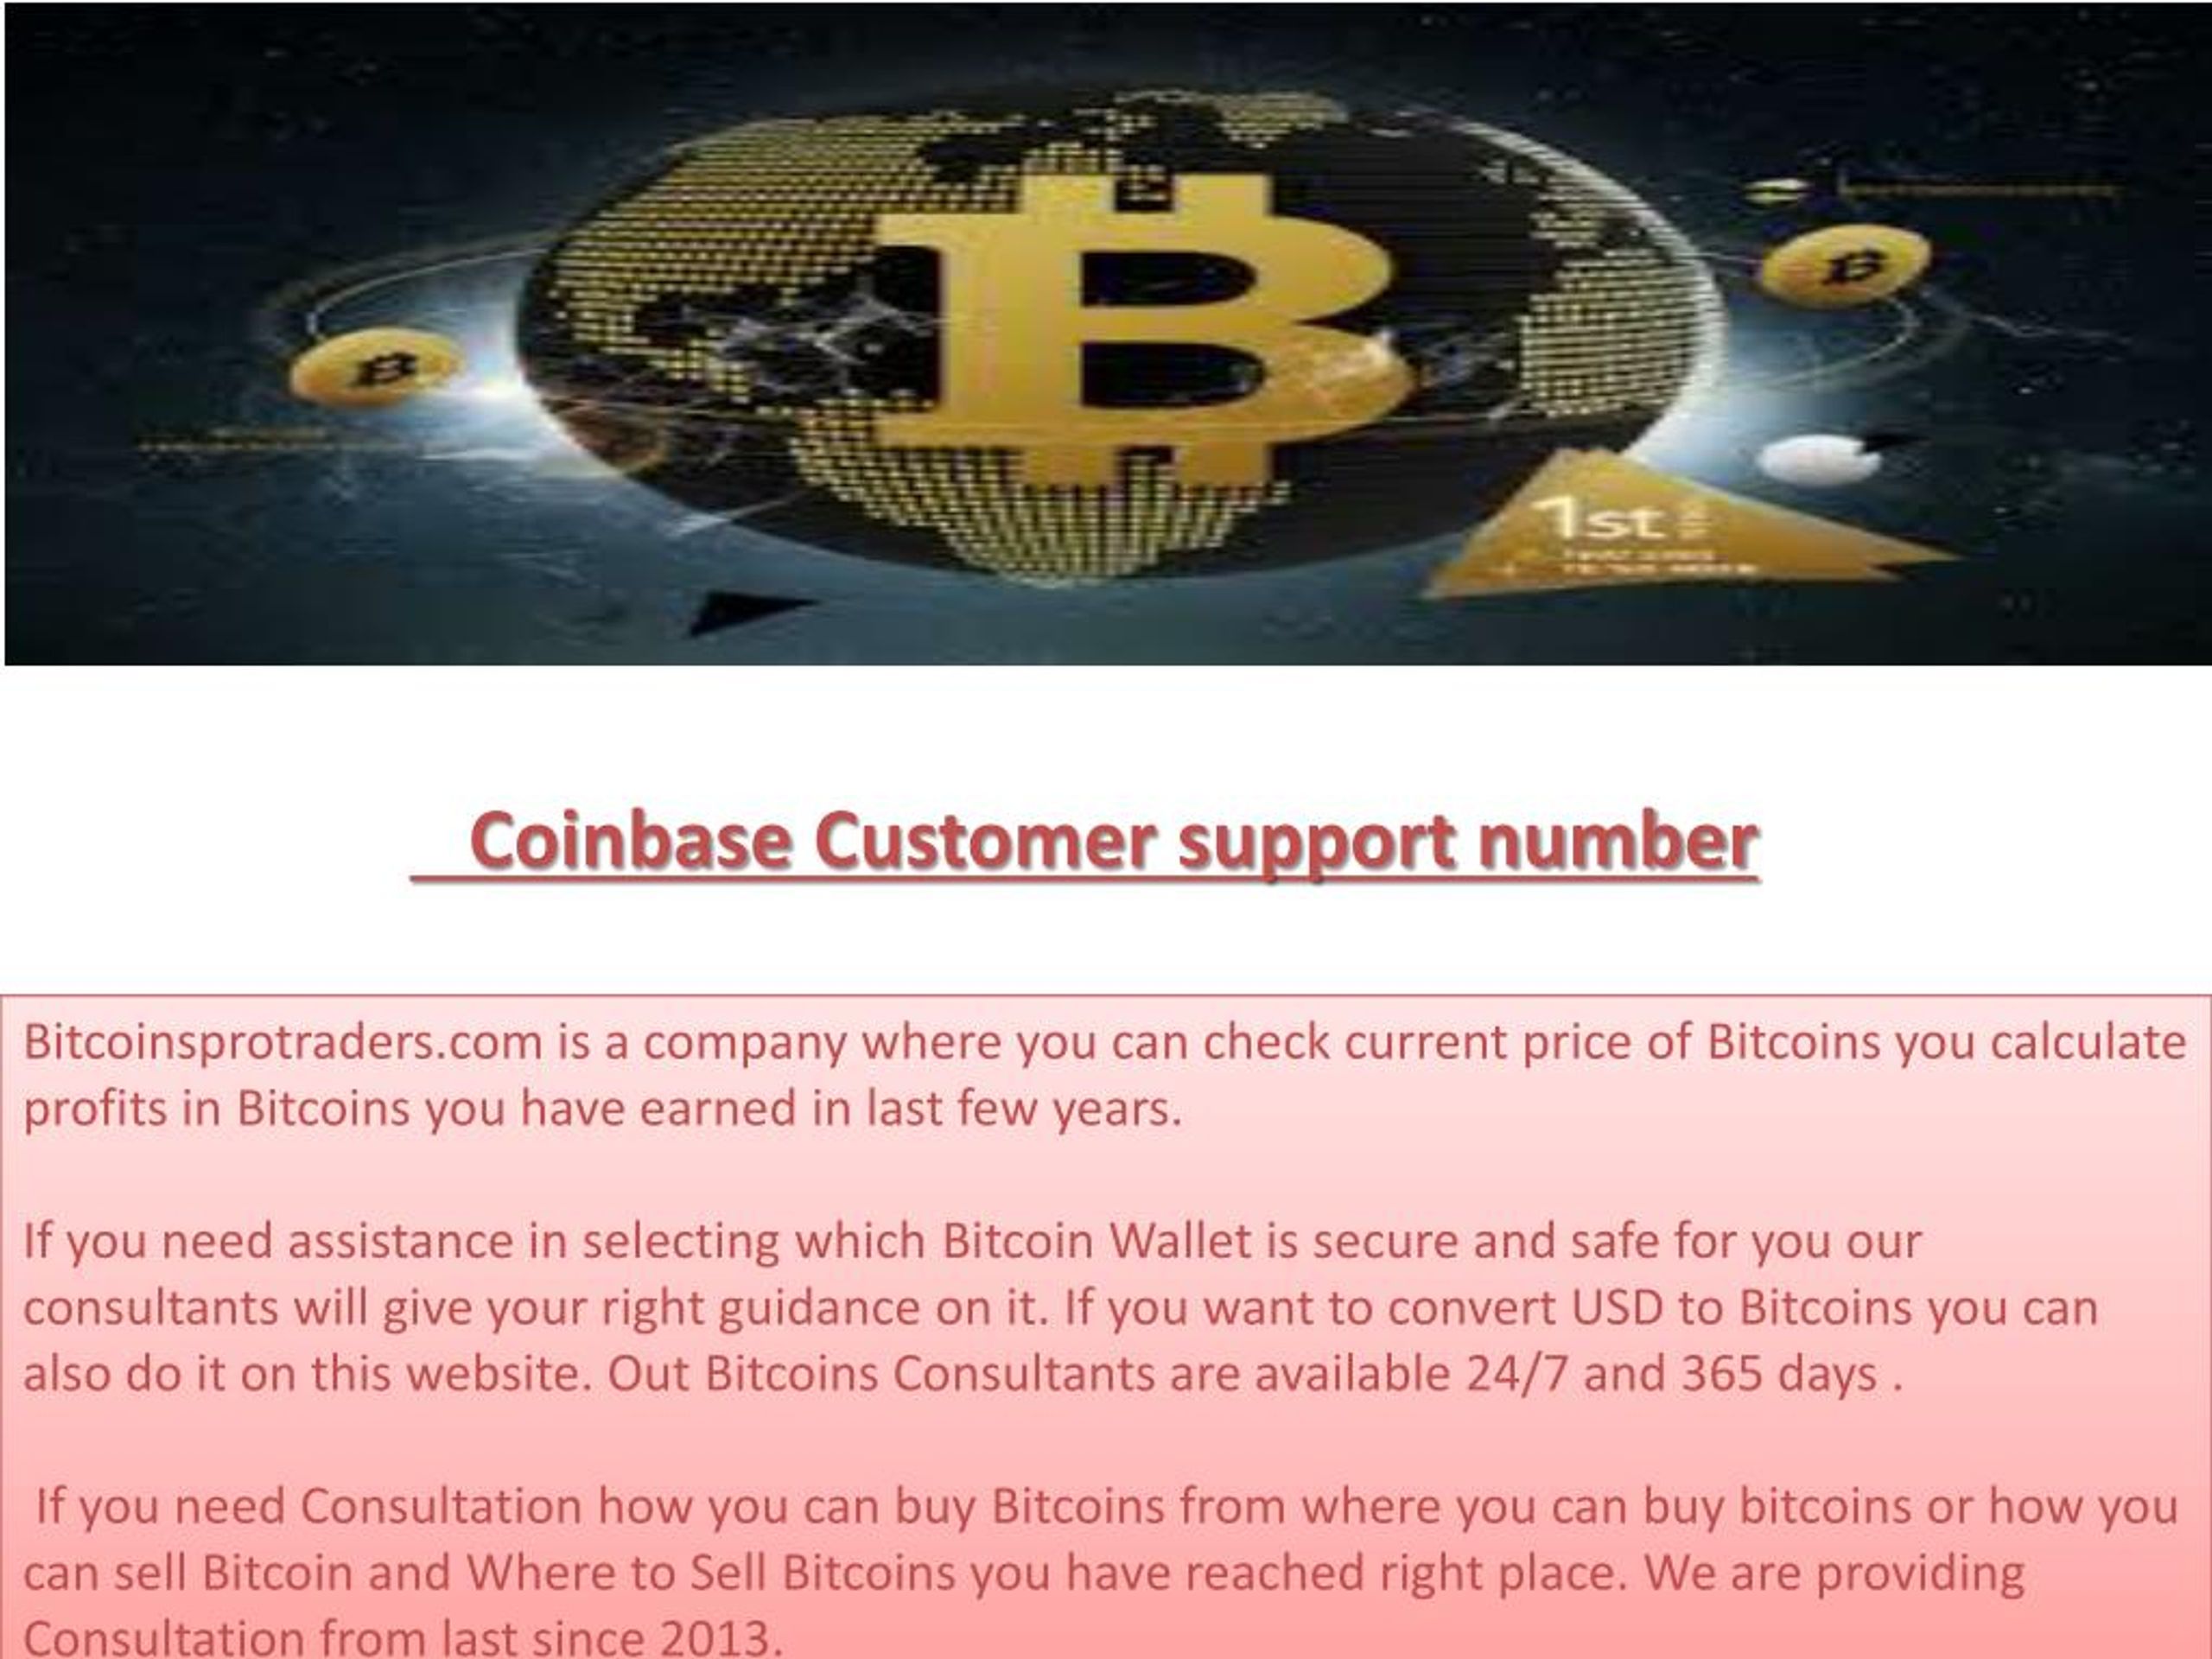 PPT - Coinbase Customer Support Number PowerPoint ...